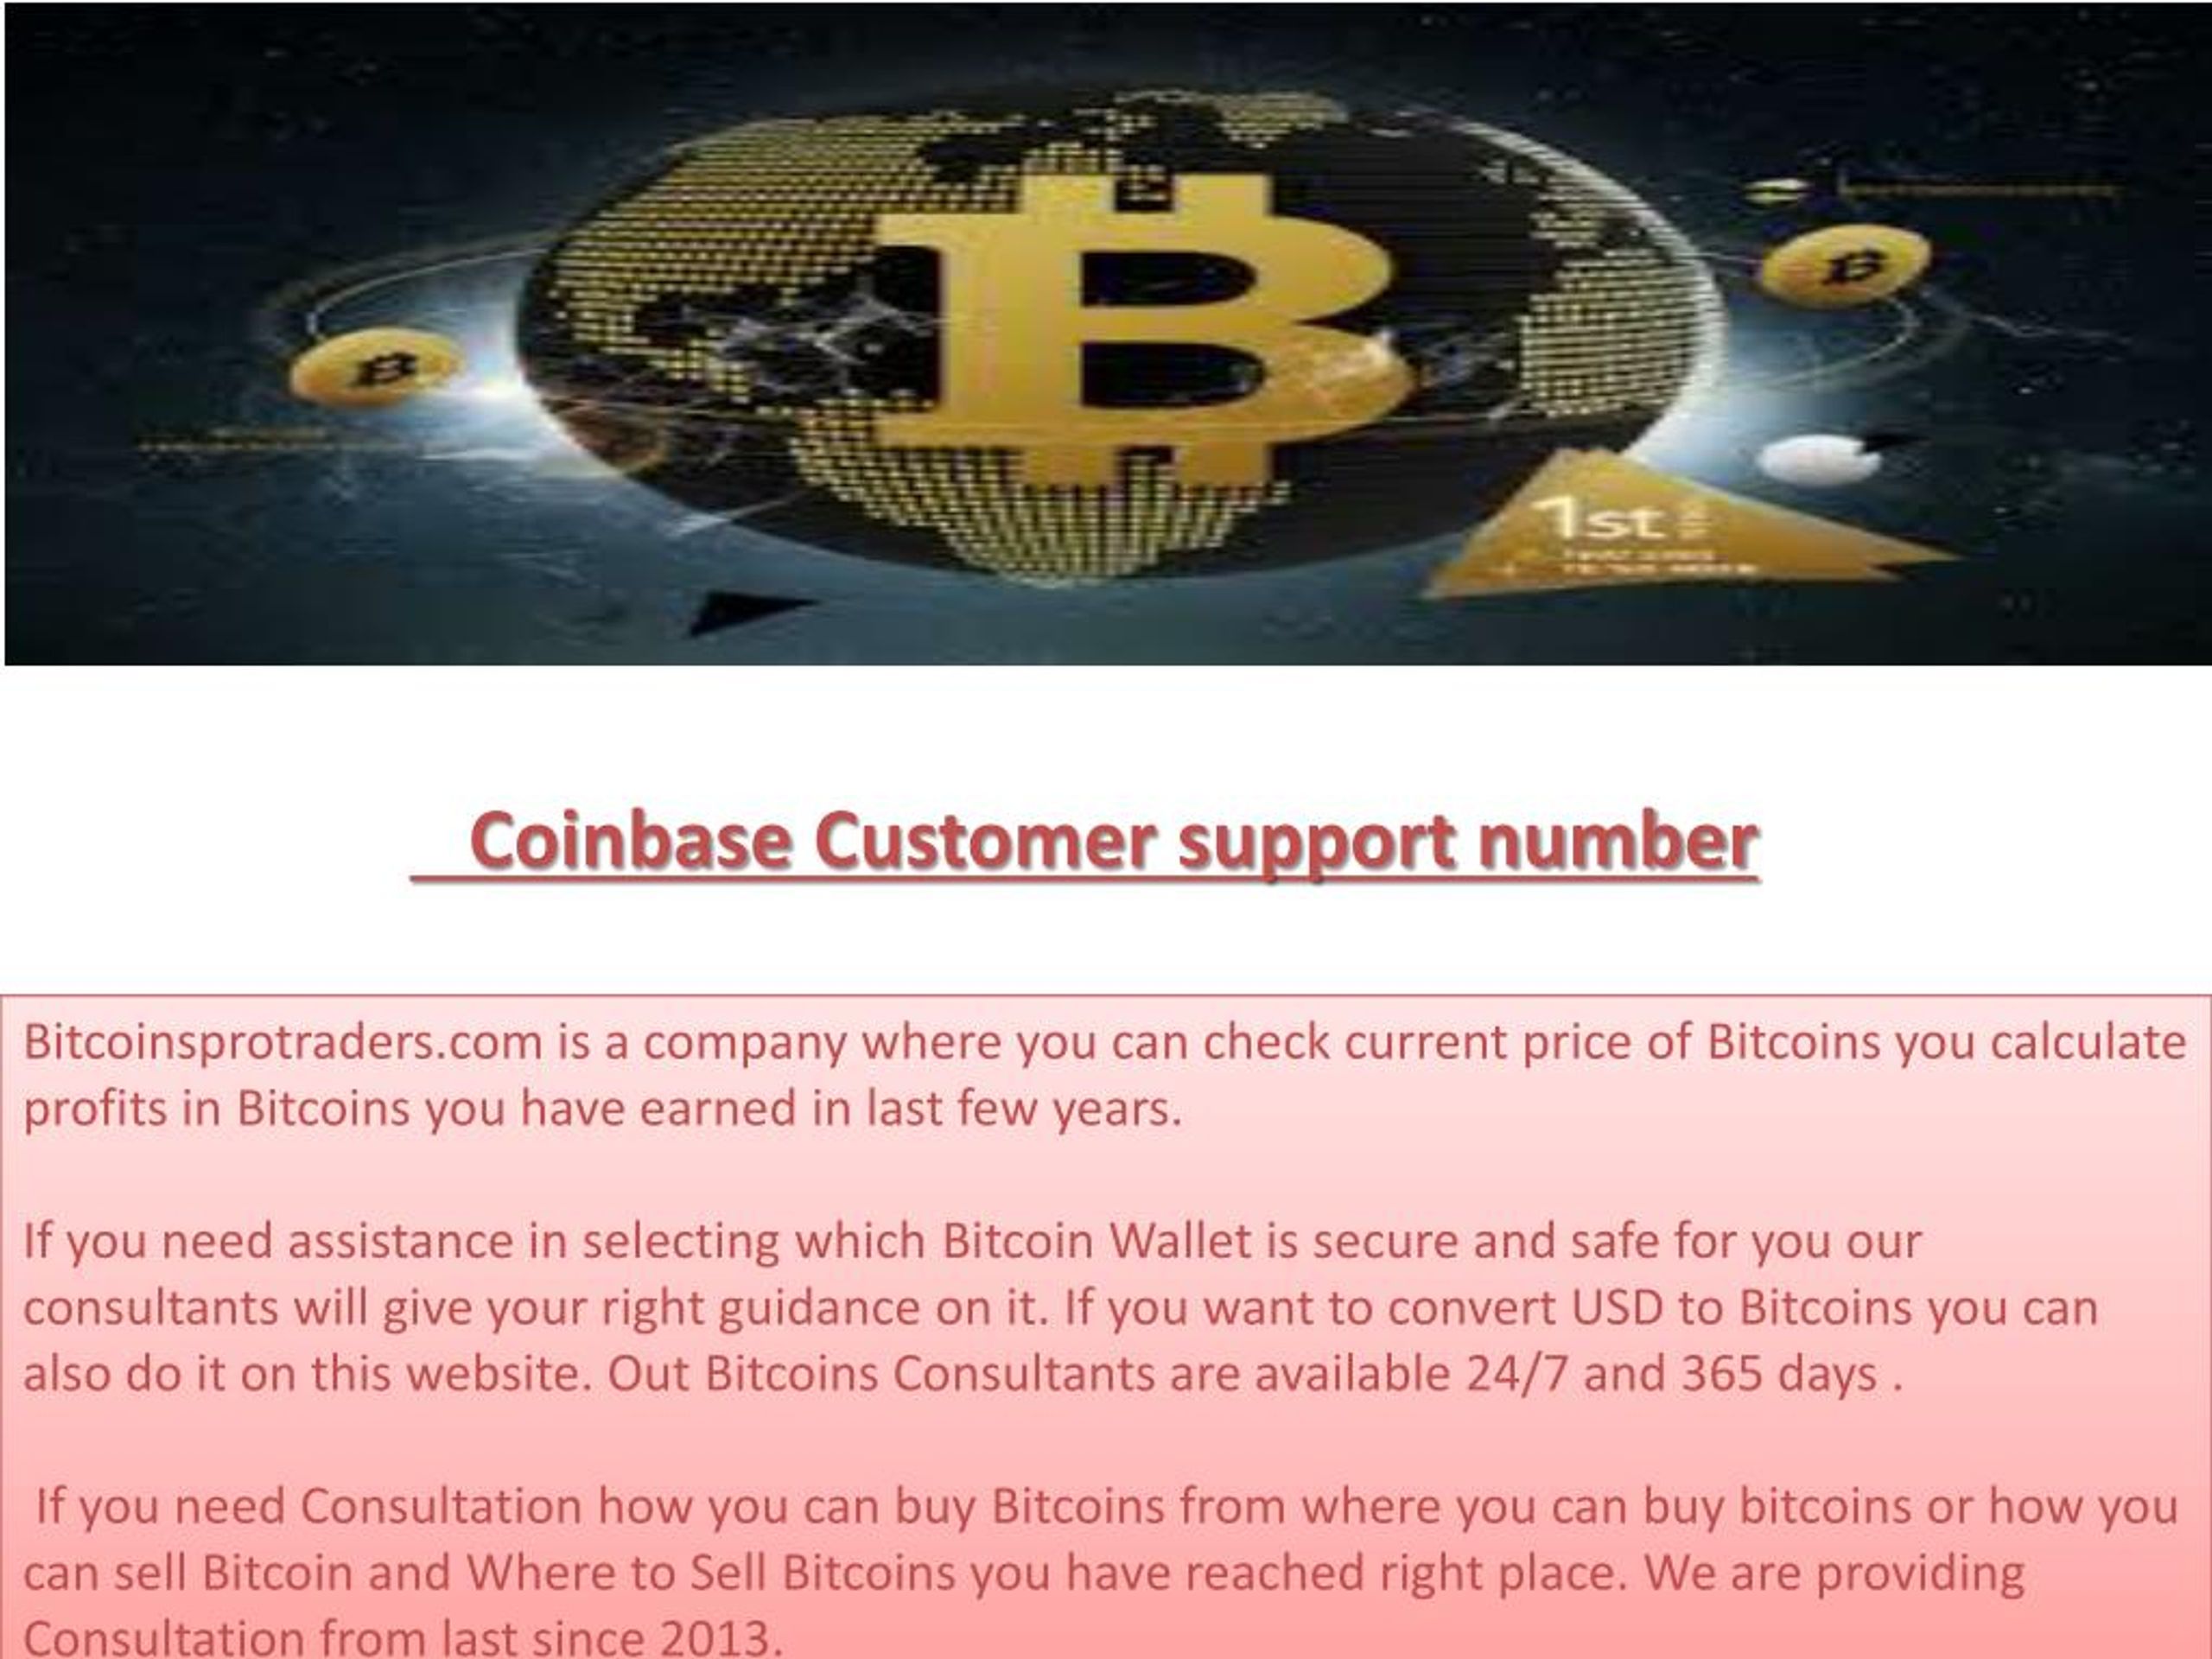 PPT - Coinbase Customer Support Number PowerPoint ...